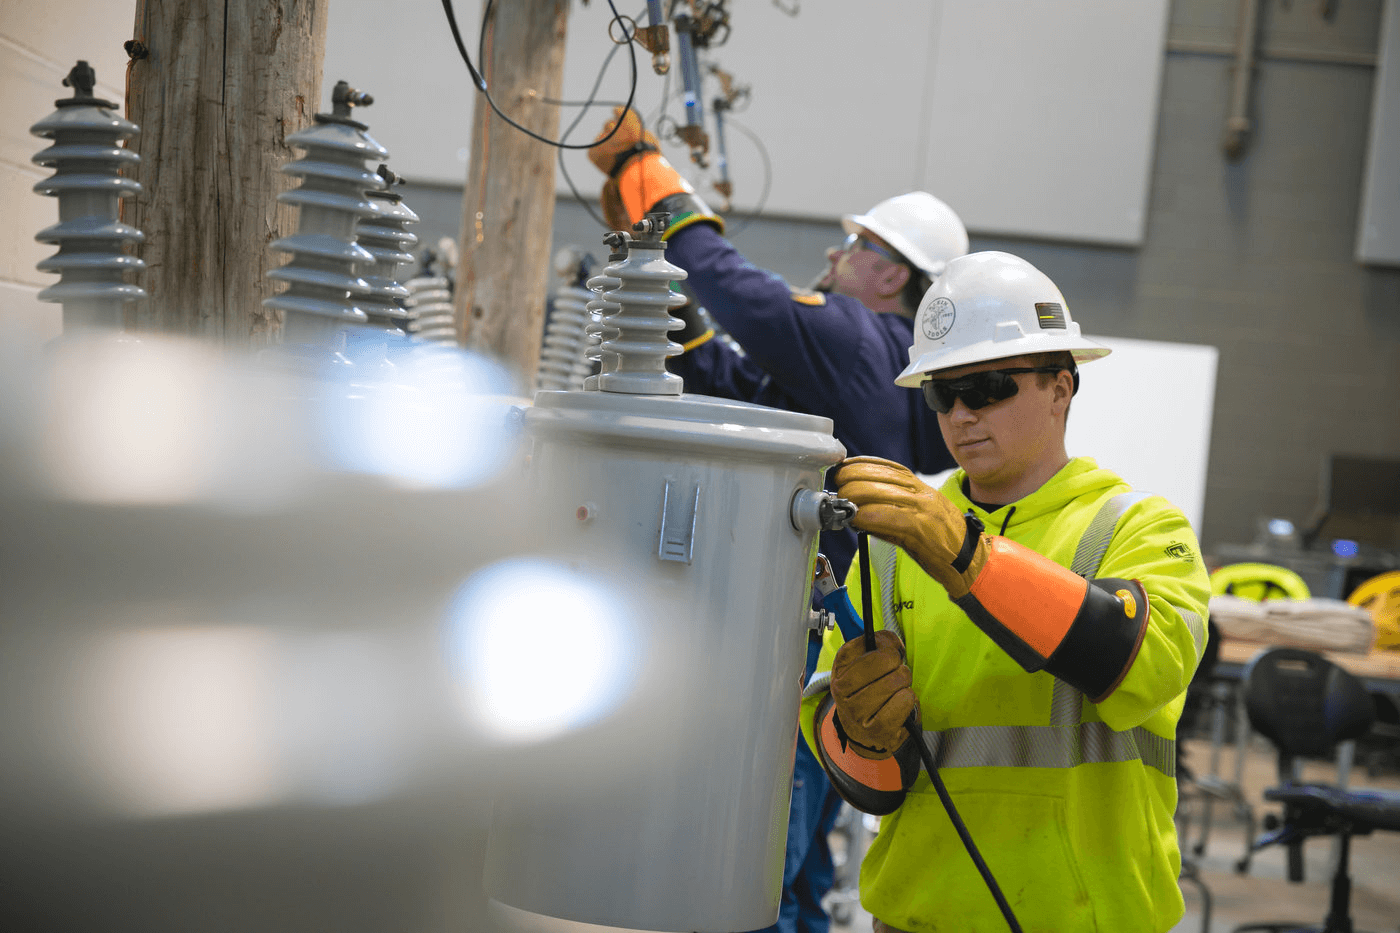 Electrical Power Distribution workers